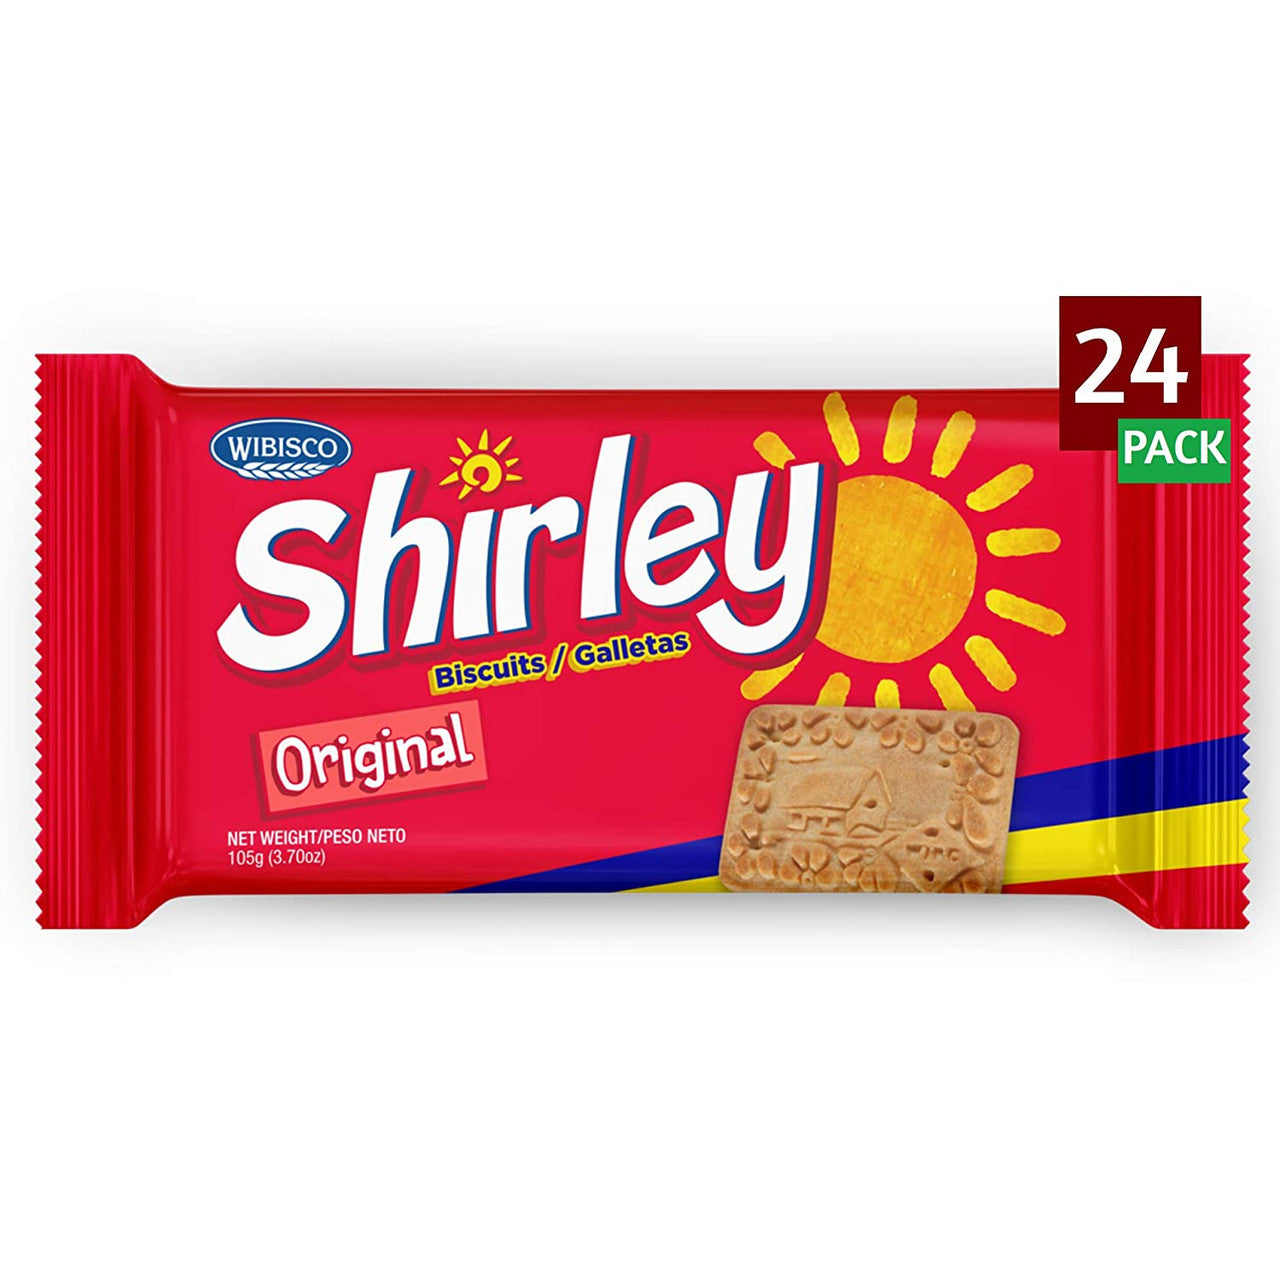 Shirley Biscuits sold on Niyis